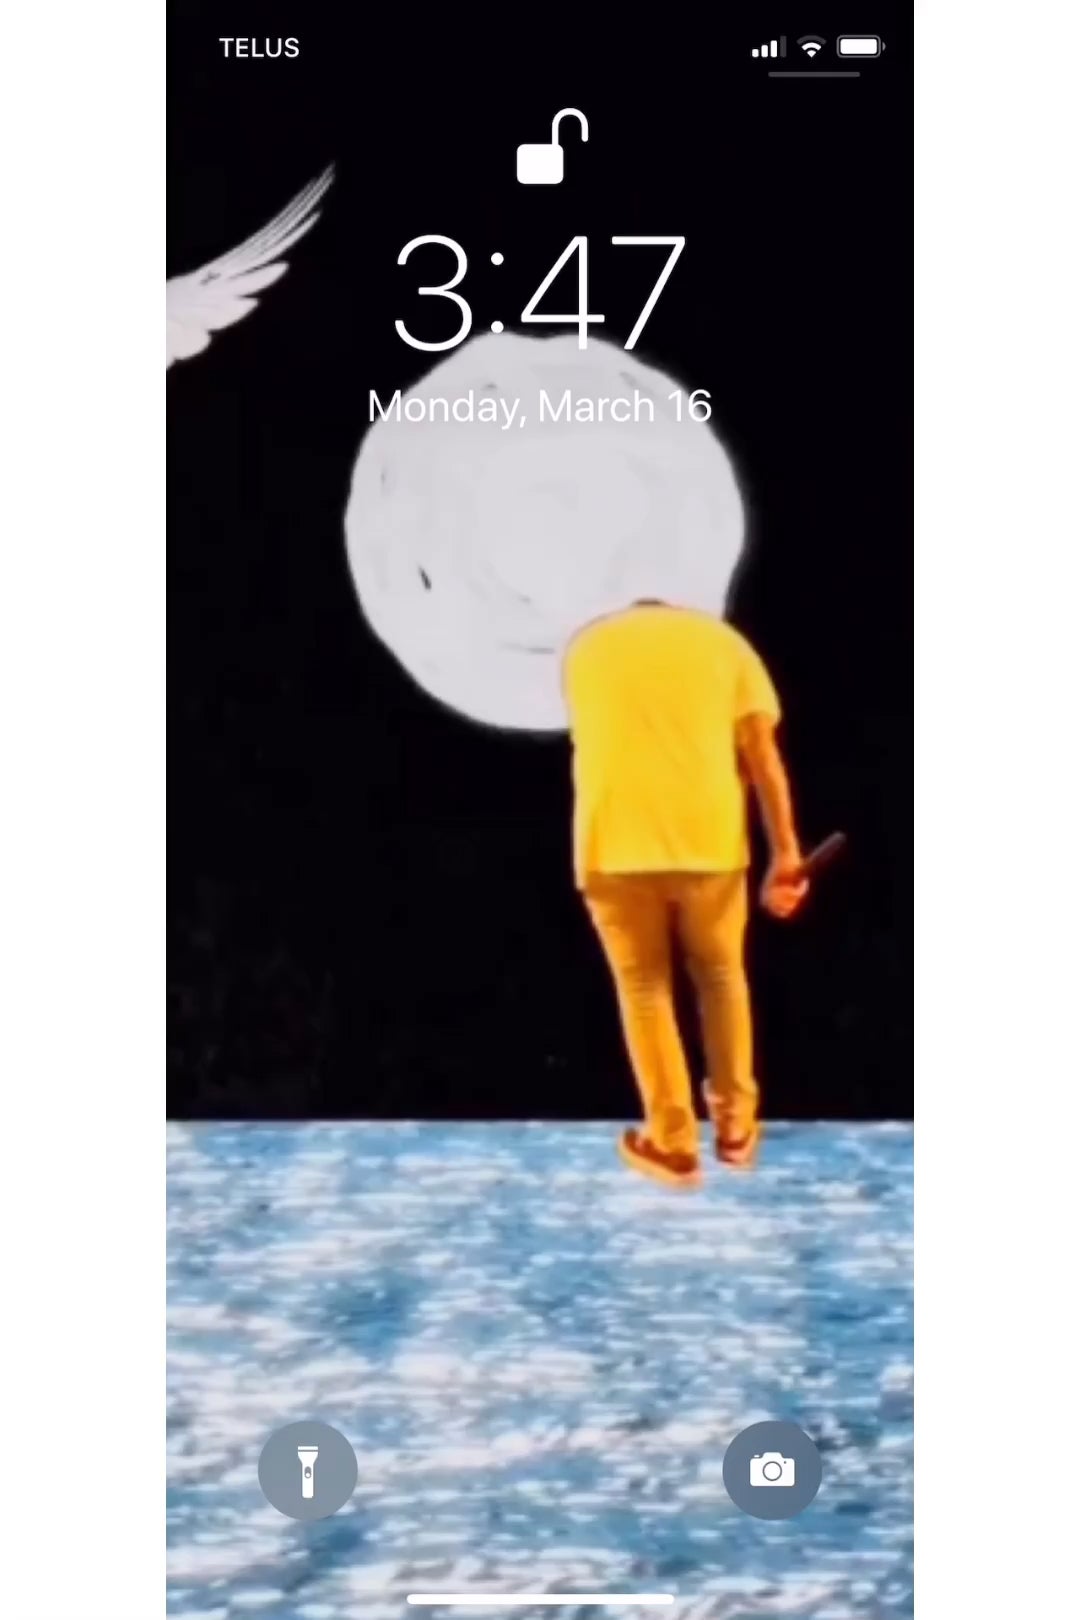 Mac miller live wallpaper iphone x inspired by antelrobs post rmacmiller